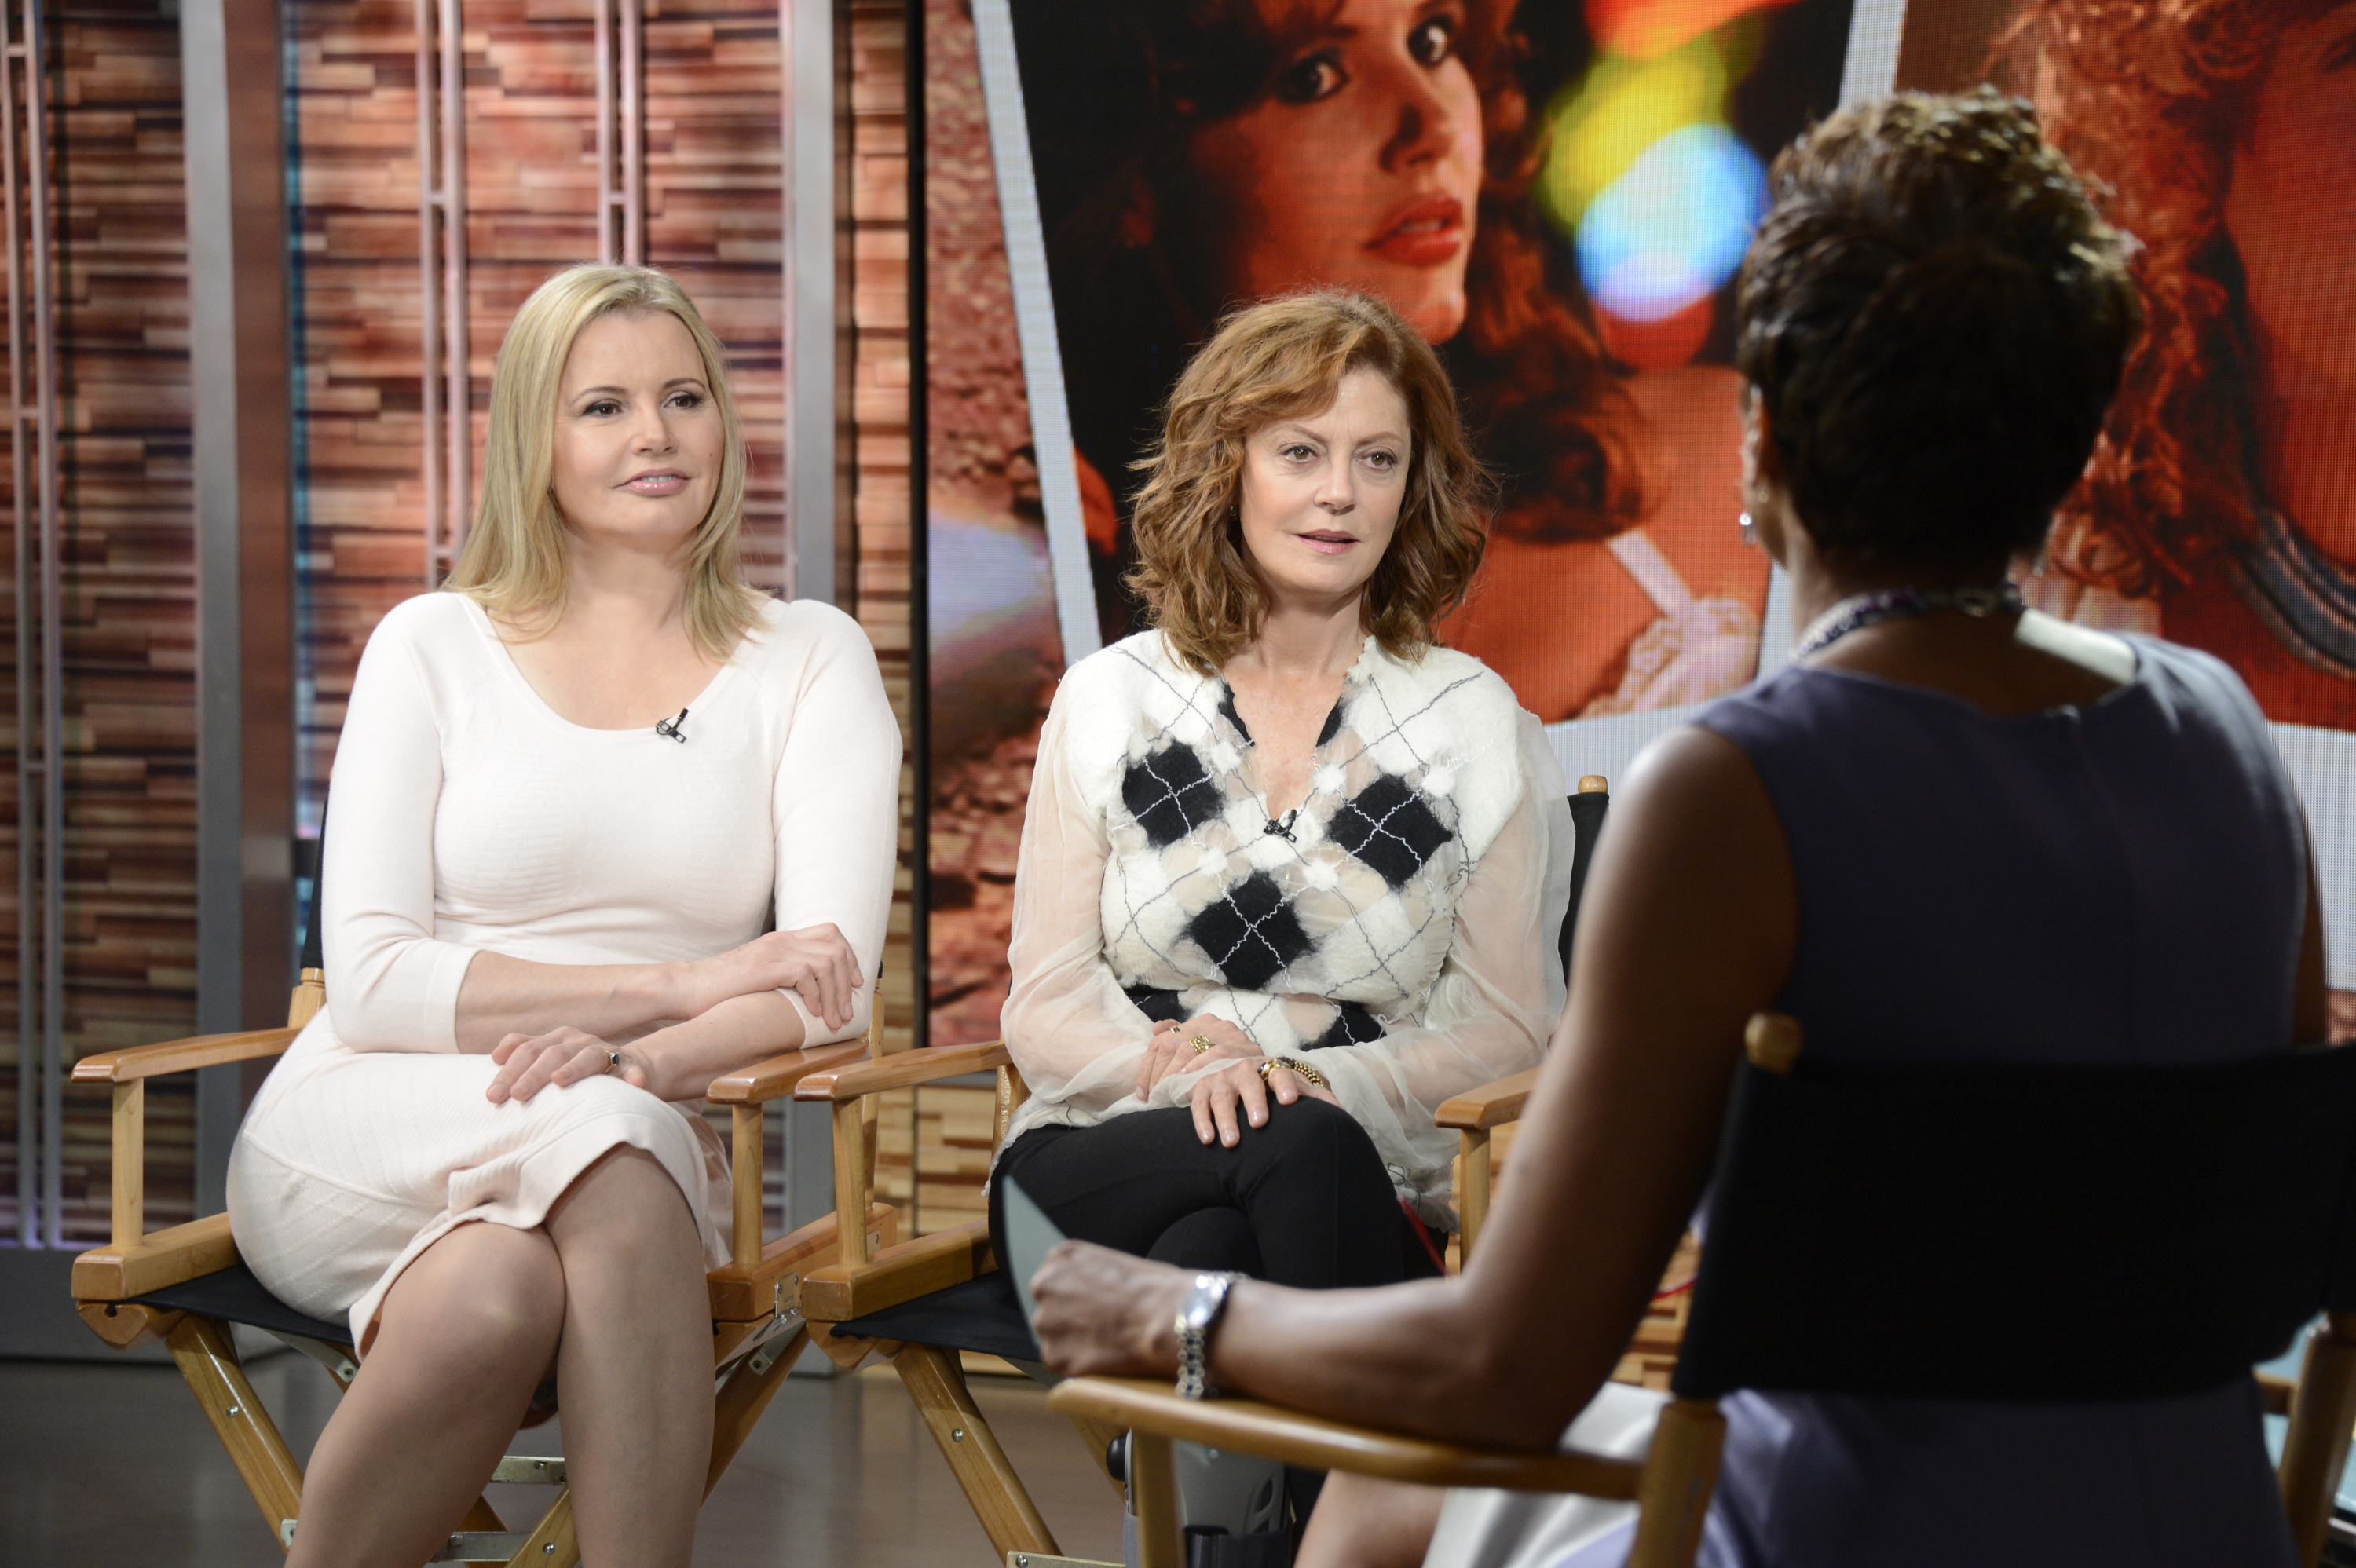 Geena Davis and Susan Sarandon at the 25th anniversary of their iconic film "Thelma & Louise" on "Good Morning America" on April 28, 2016 | Source: Getty Images